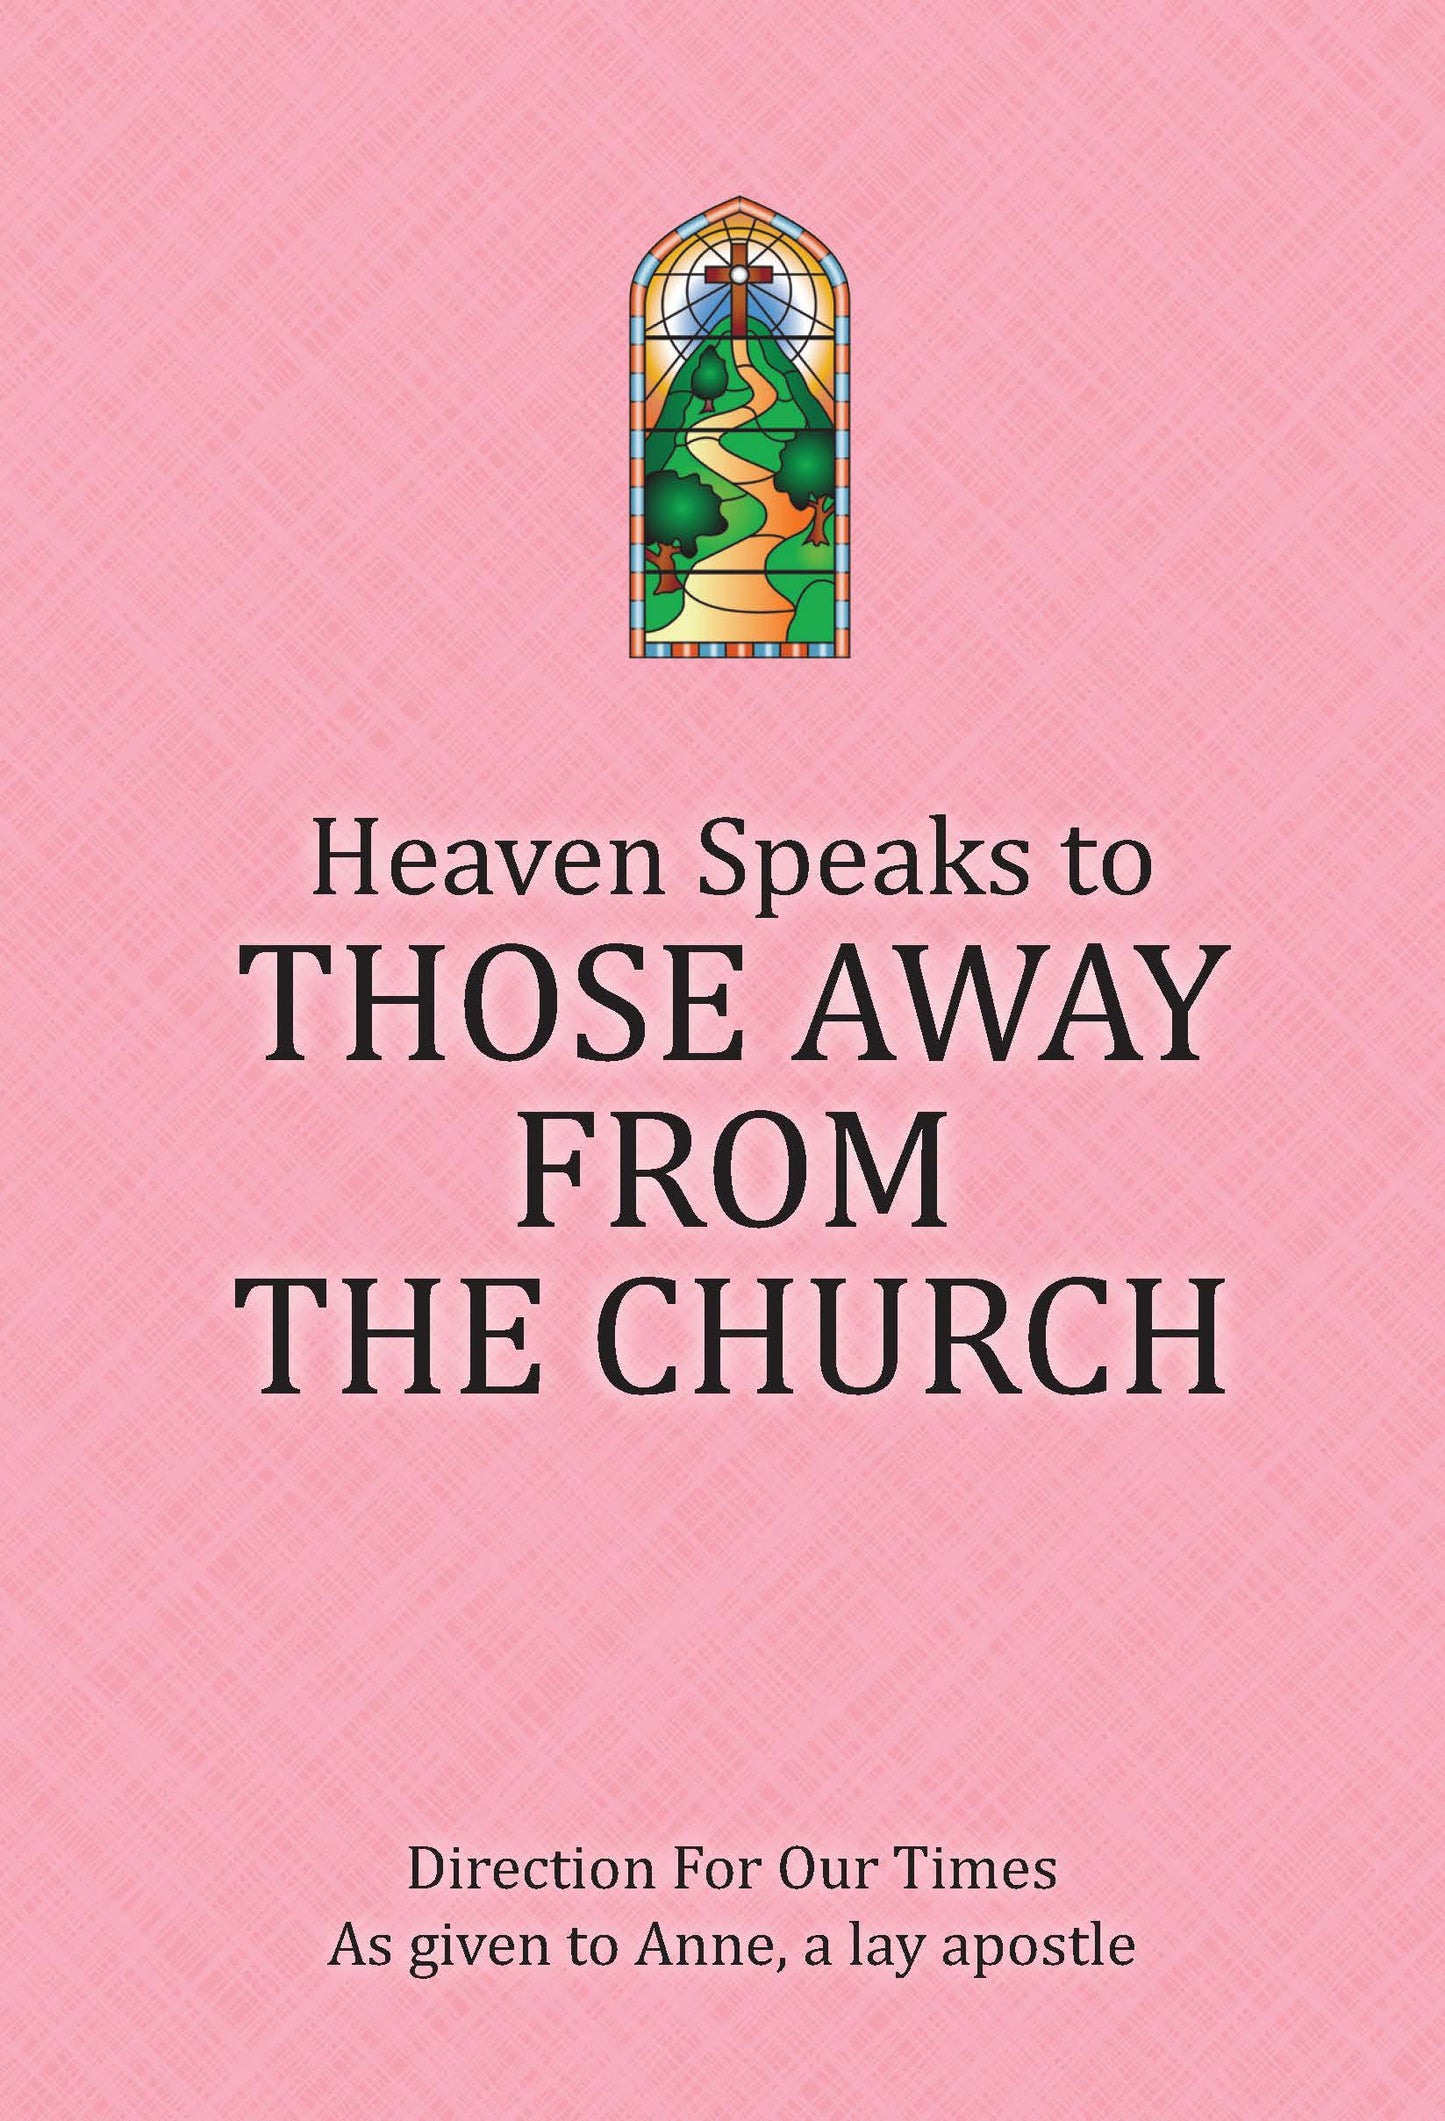 Heaven Speaks to Those Away from the Church